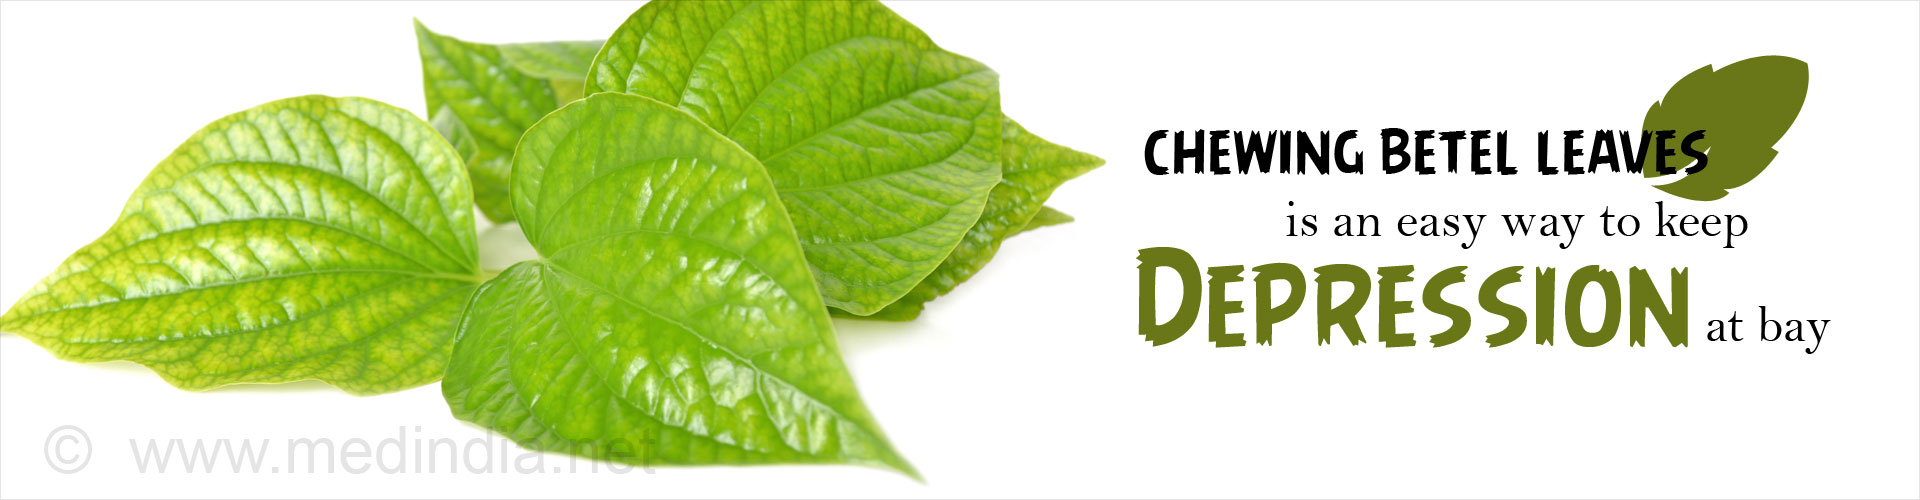 Chewing betel leaves is an easy way to keep depression at bay